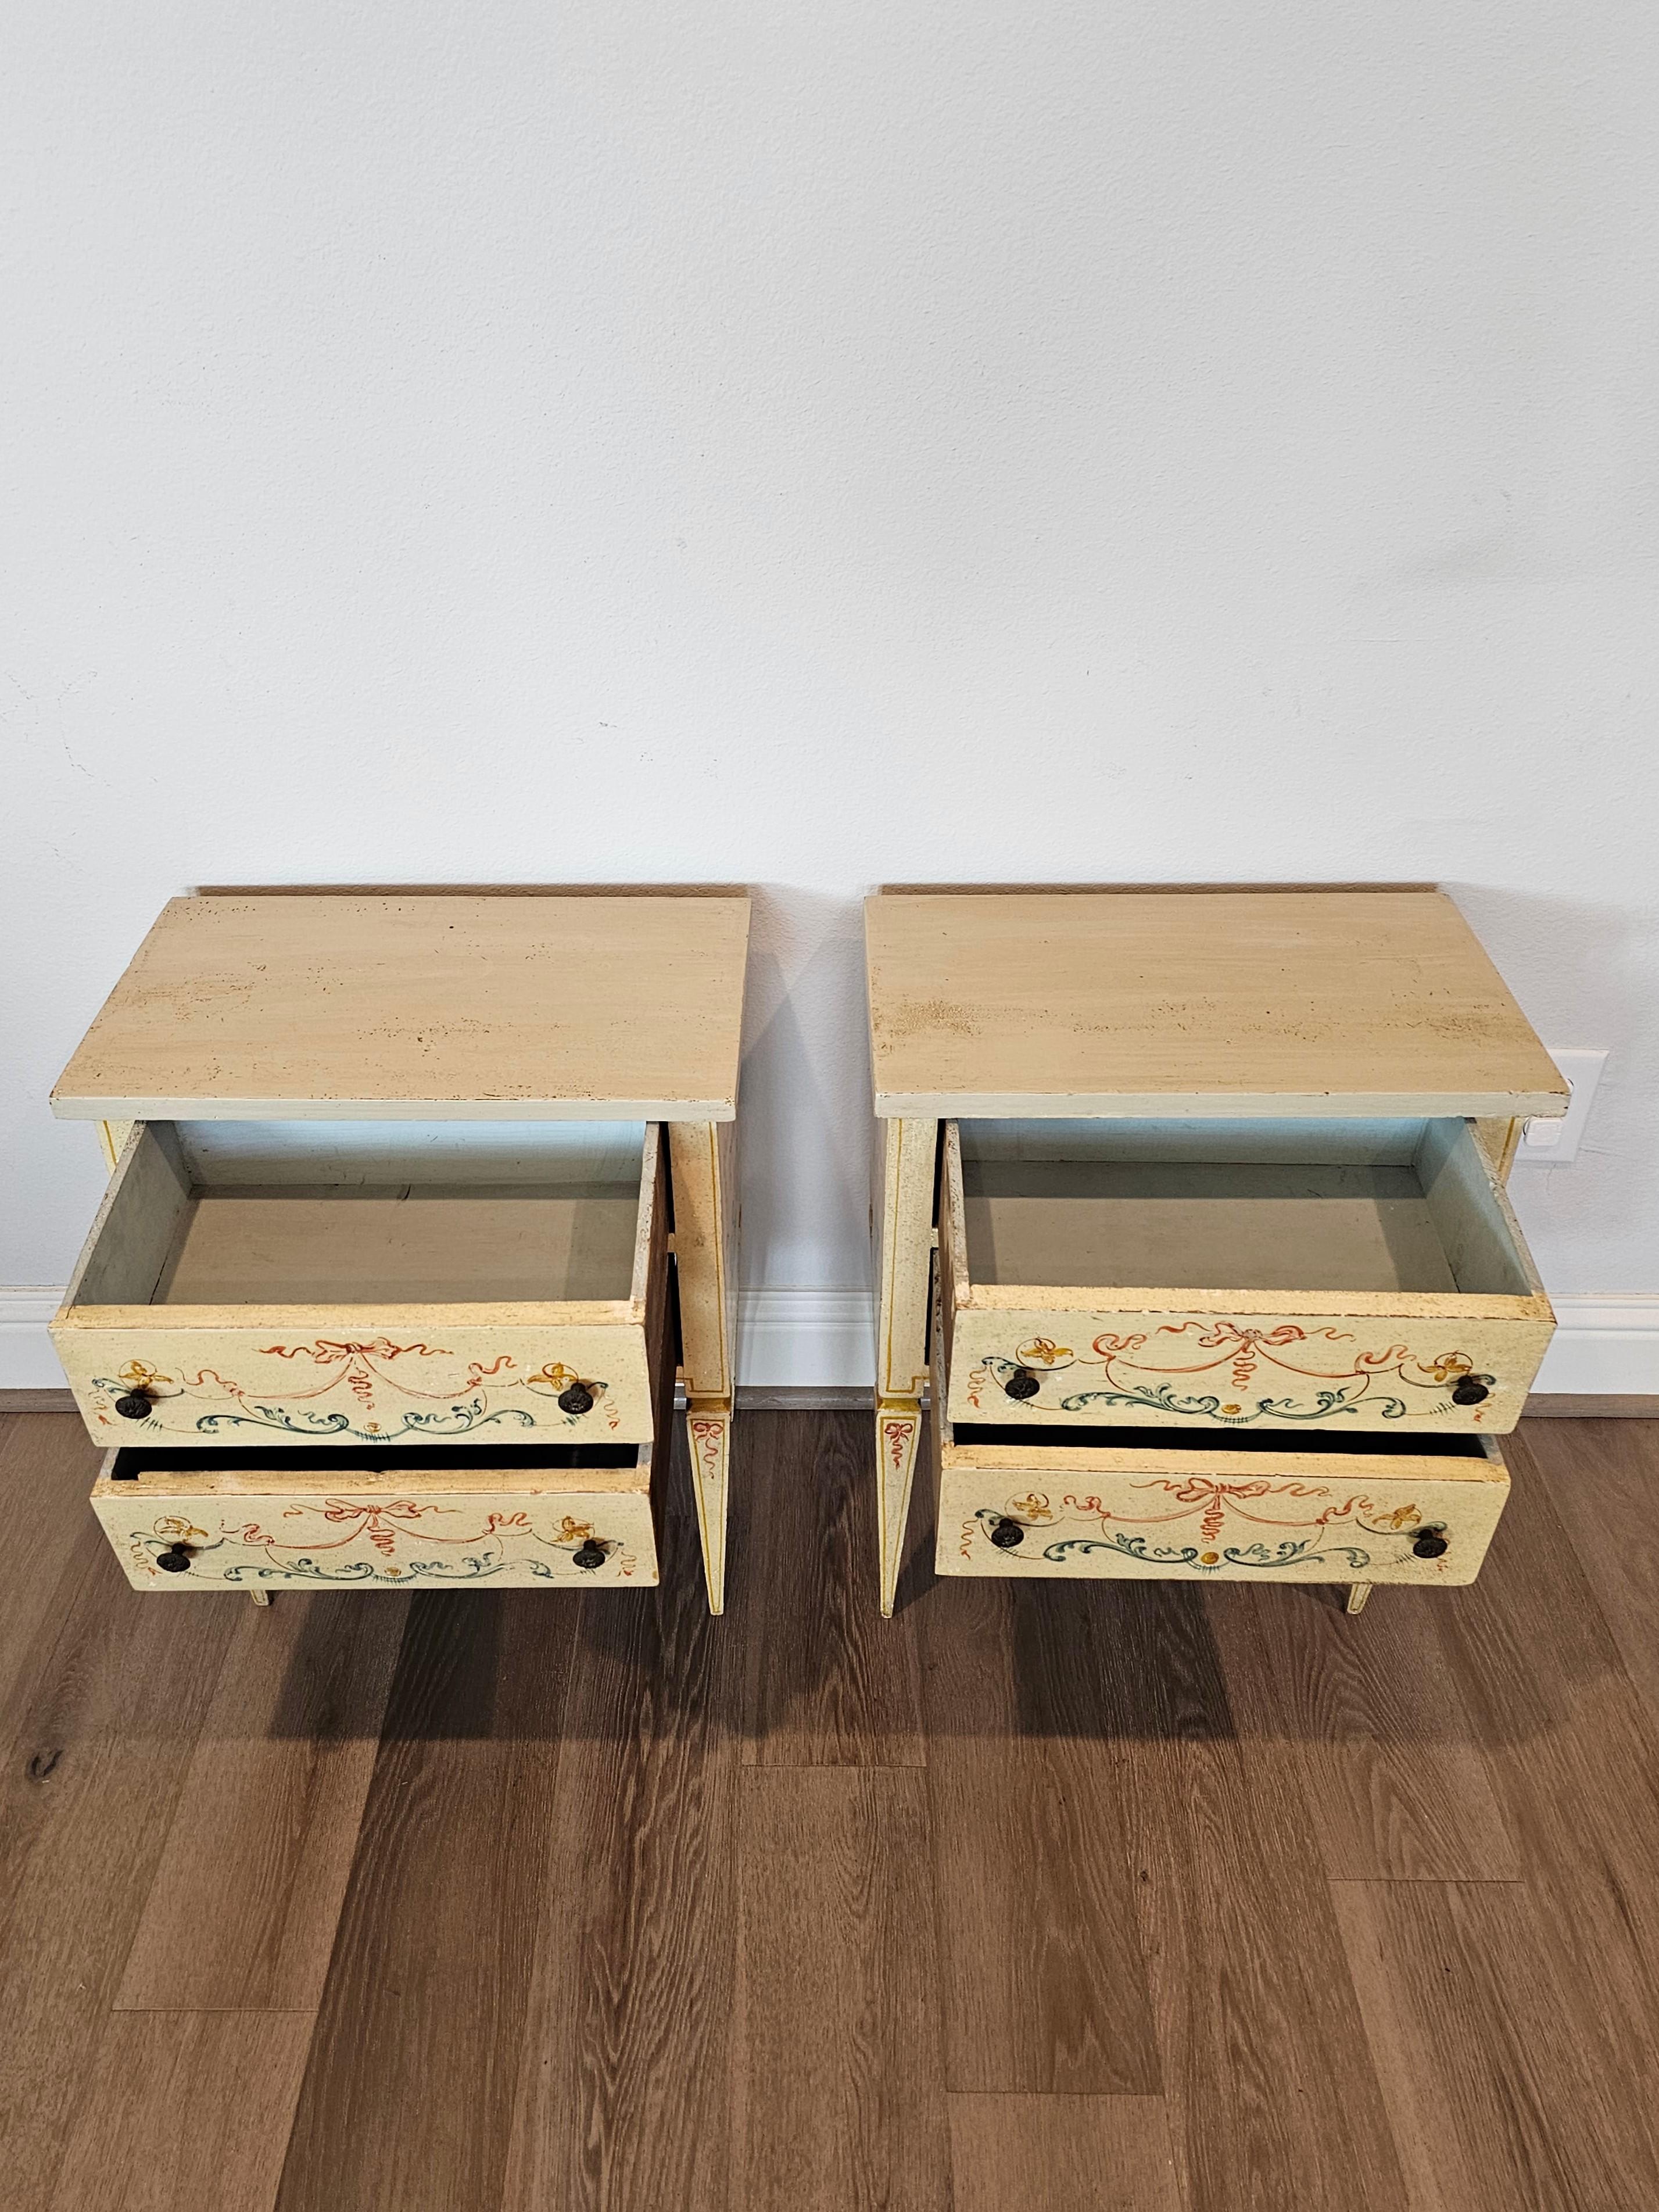 20th Century Italian Neoclassical Paint Decorated Nightstand Table Pair For Sale